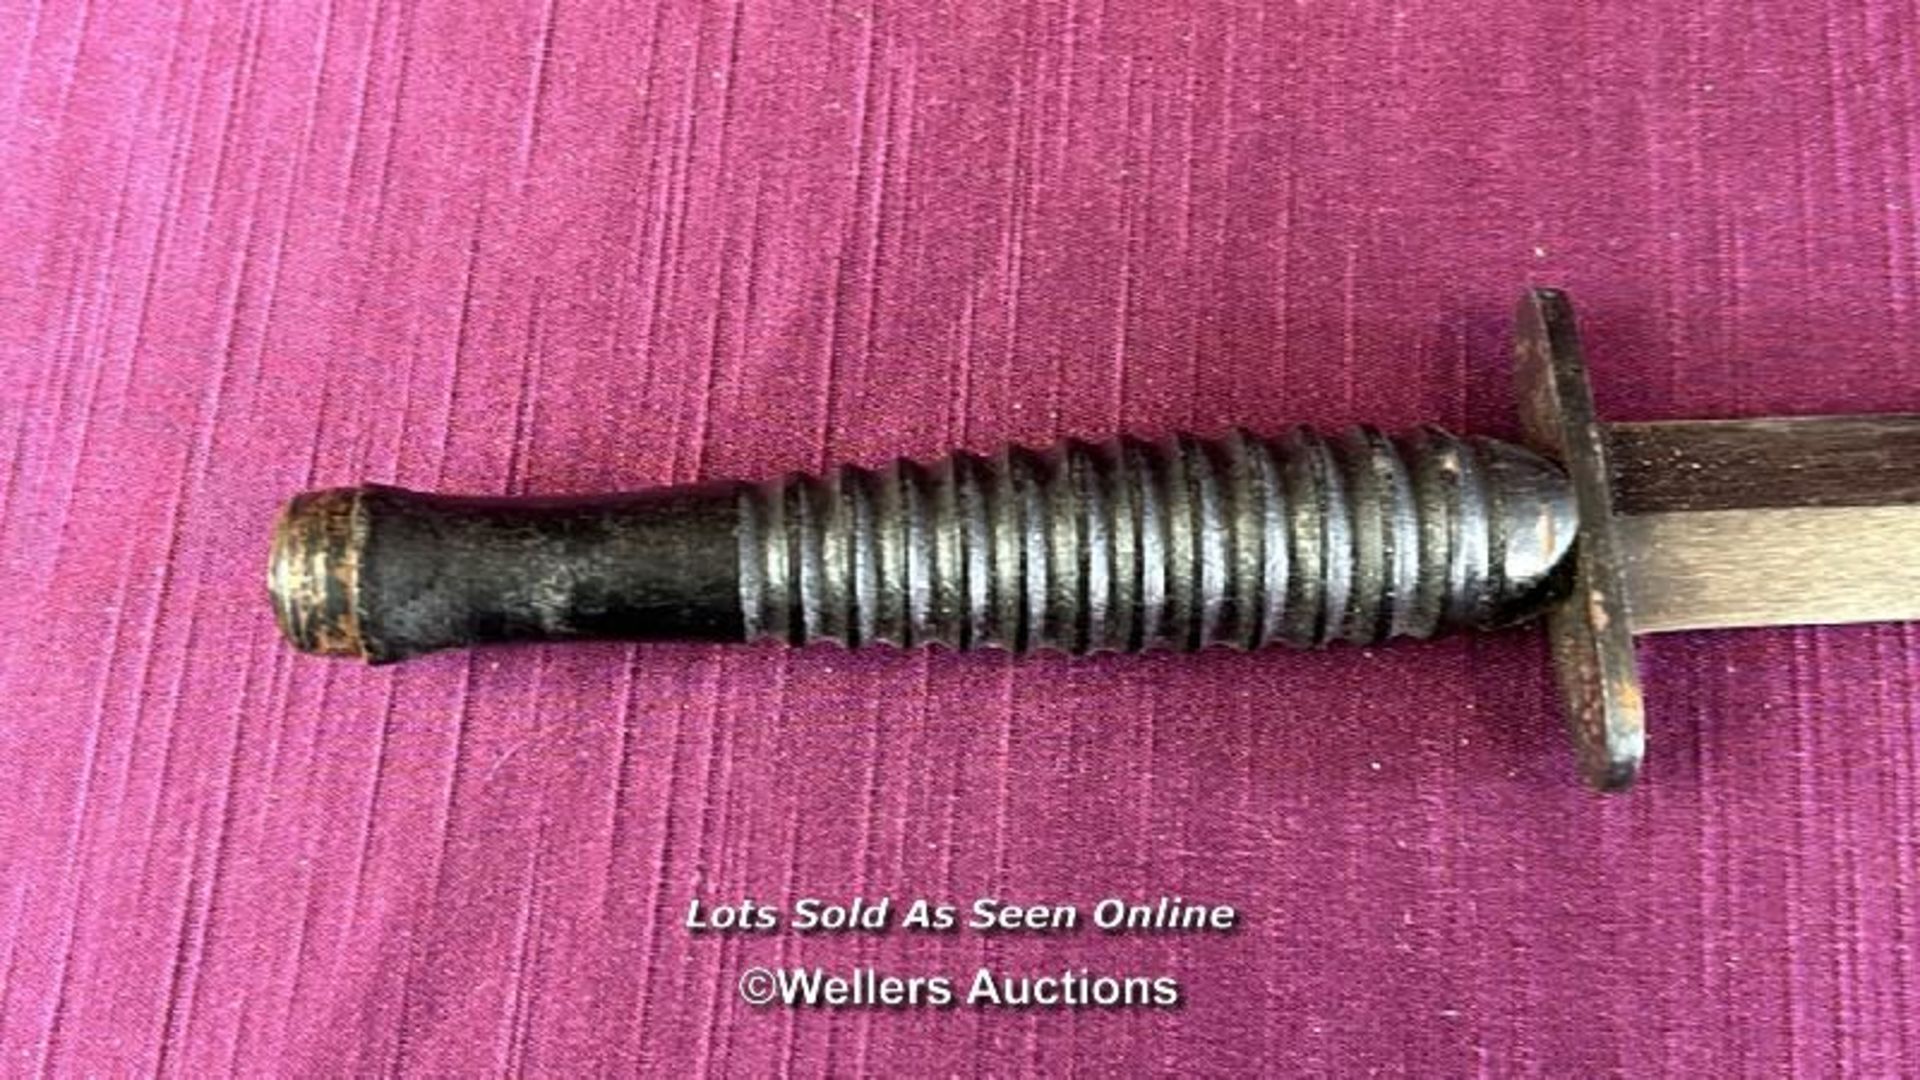 WORLD WAR TWO STYLE FAIRBAIRN-SYKES FIGHTING KNIFE WITH LEATHER SCABBARD, LENGTH 29CM - Image 2 of 6